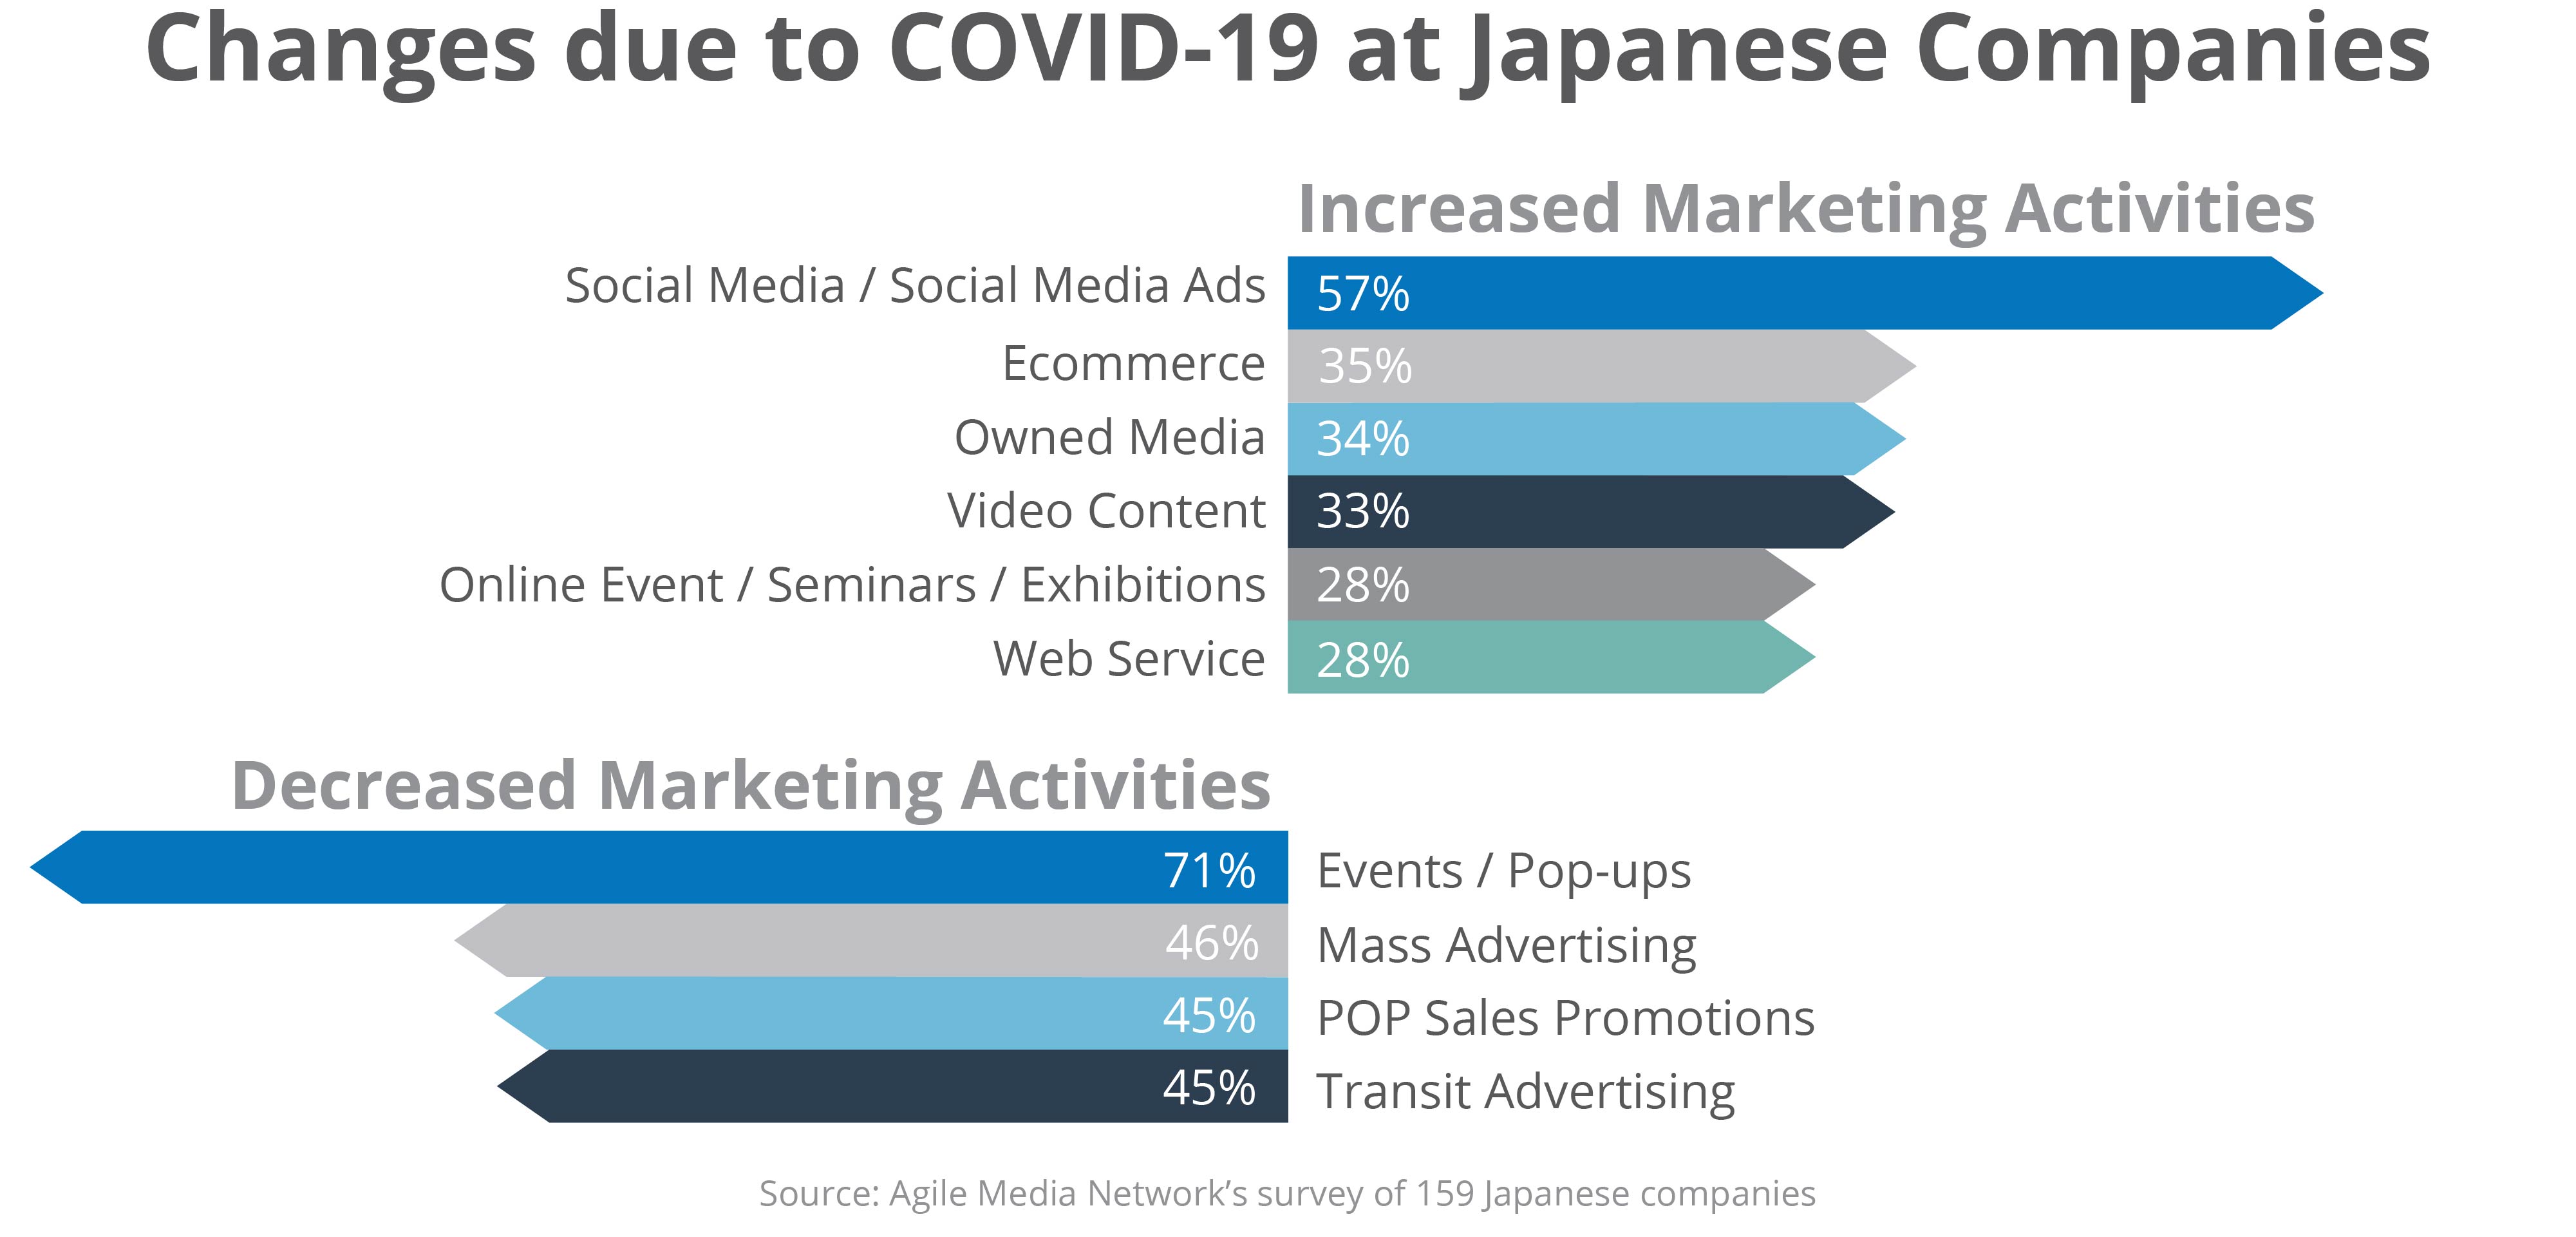 Changes in marketing activities at Japanese companies due to COVID-19 | Digital Marketing For Asia